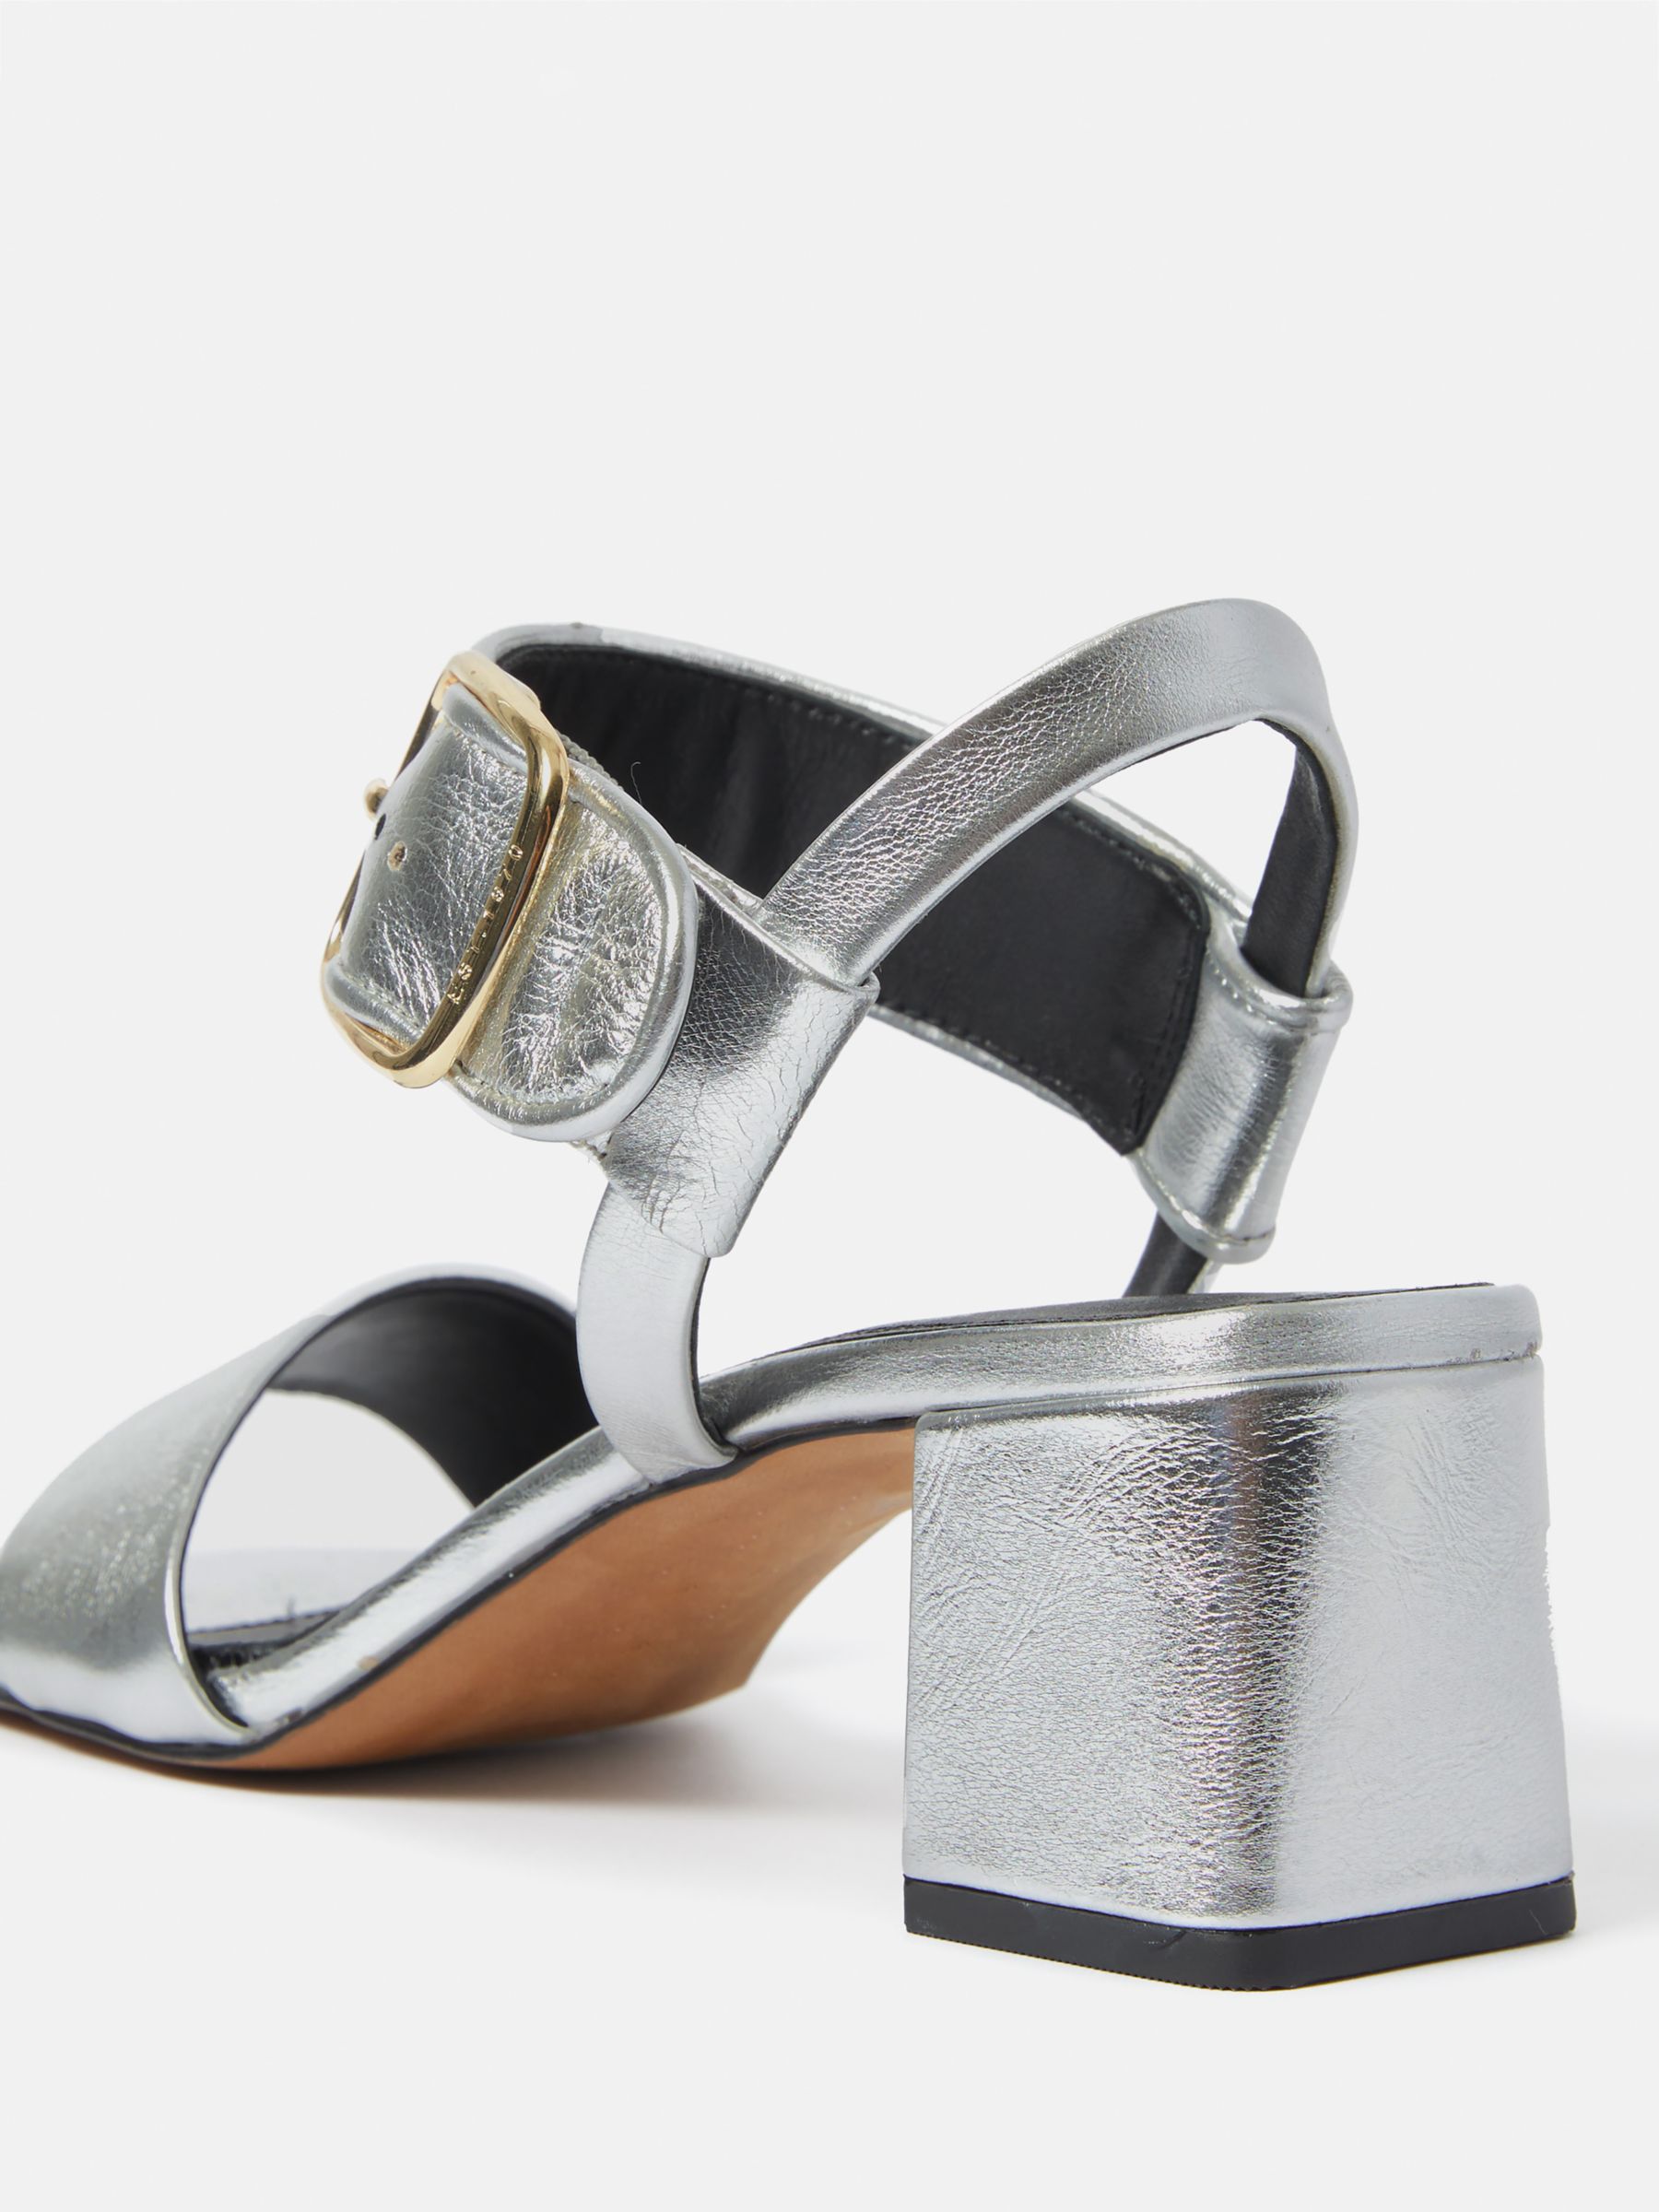 Jigsaw Maybell Leather Block Heel Sandals, Silver at John Lewis & Partners